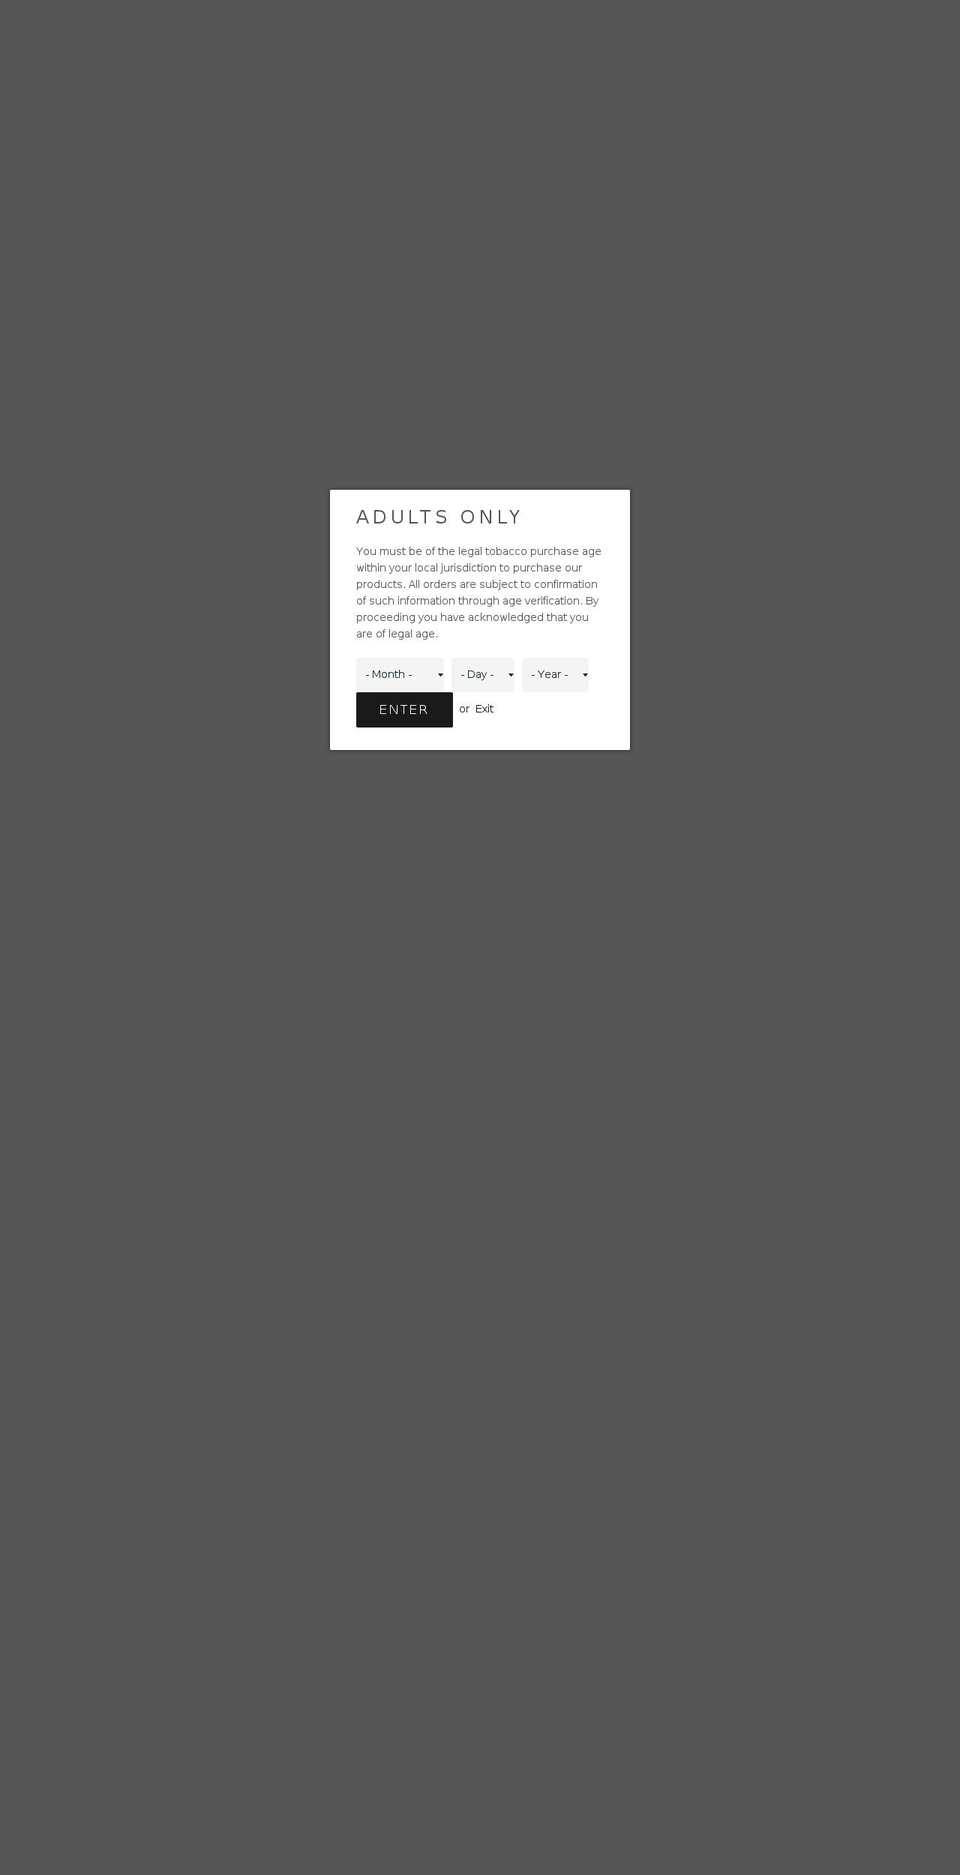 boundless Shopify theme site example kiteincloud.com